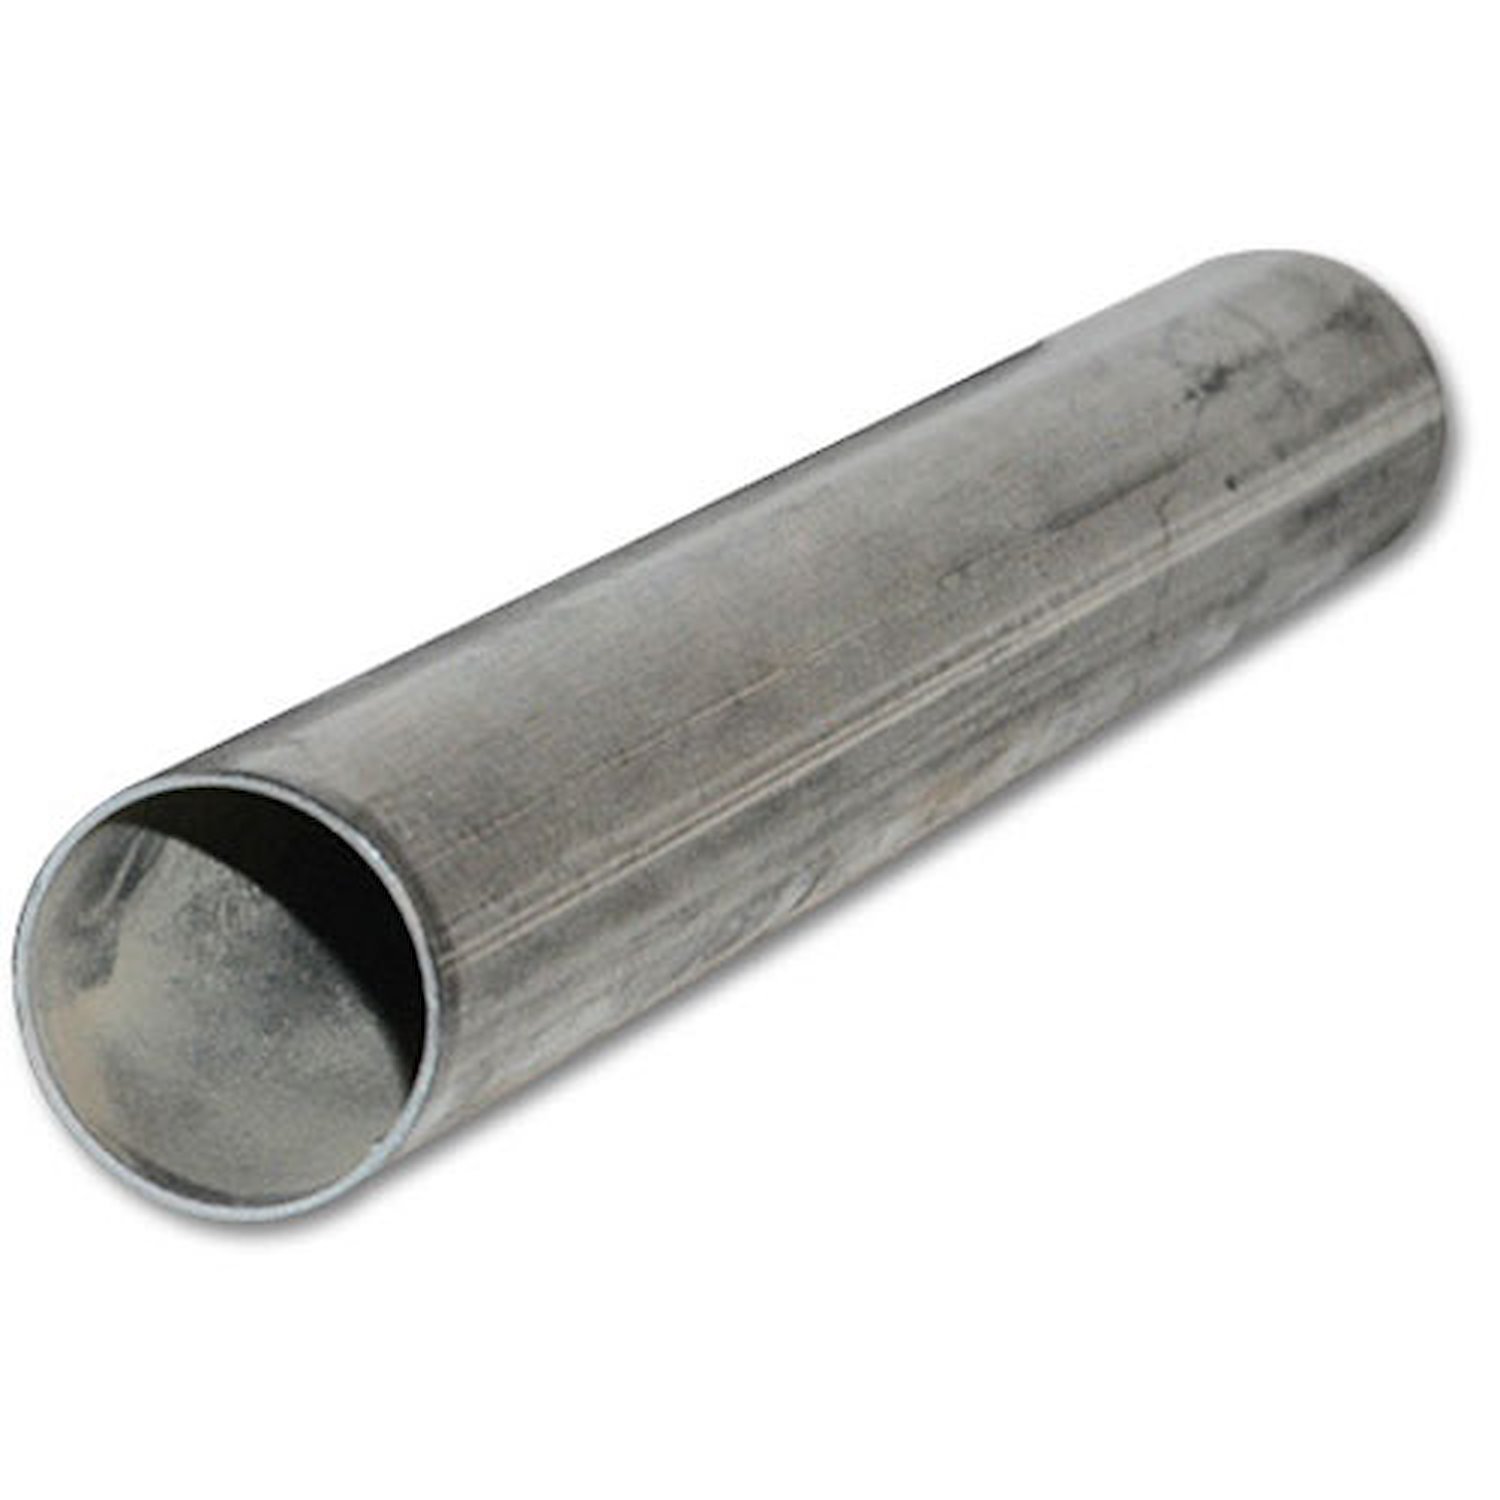 Stainless Steel Tubing Section